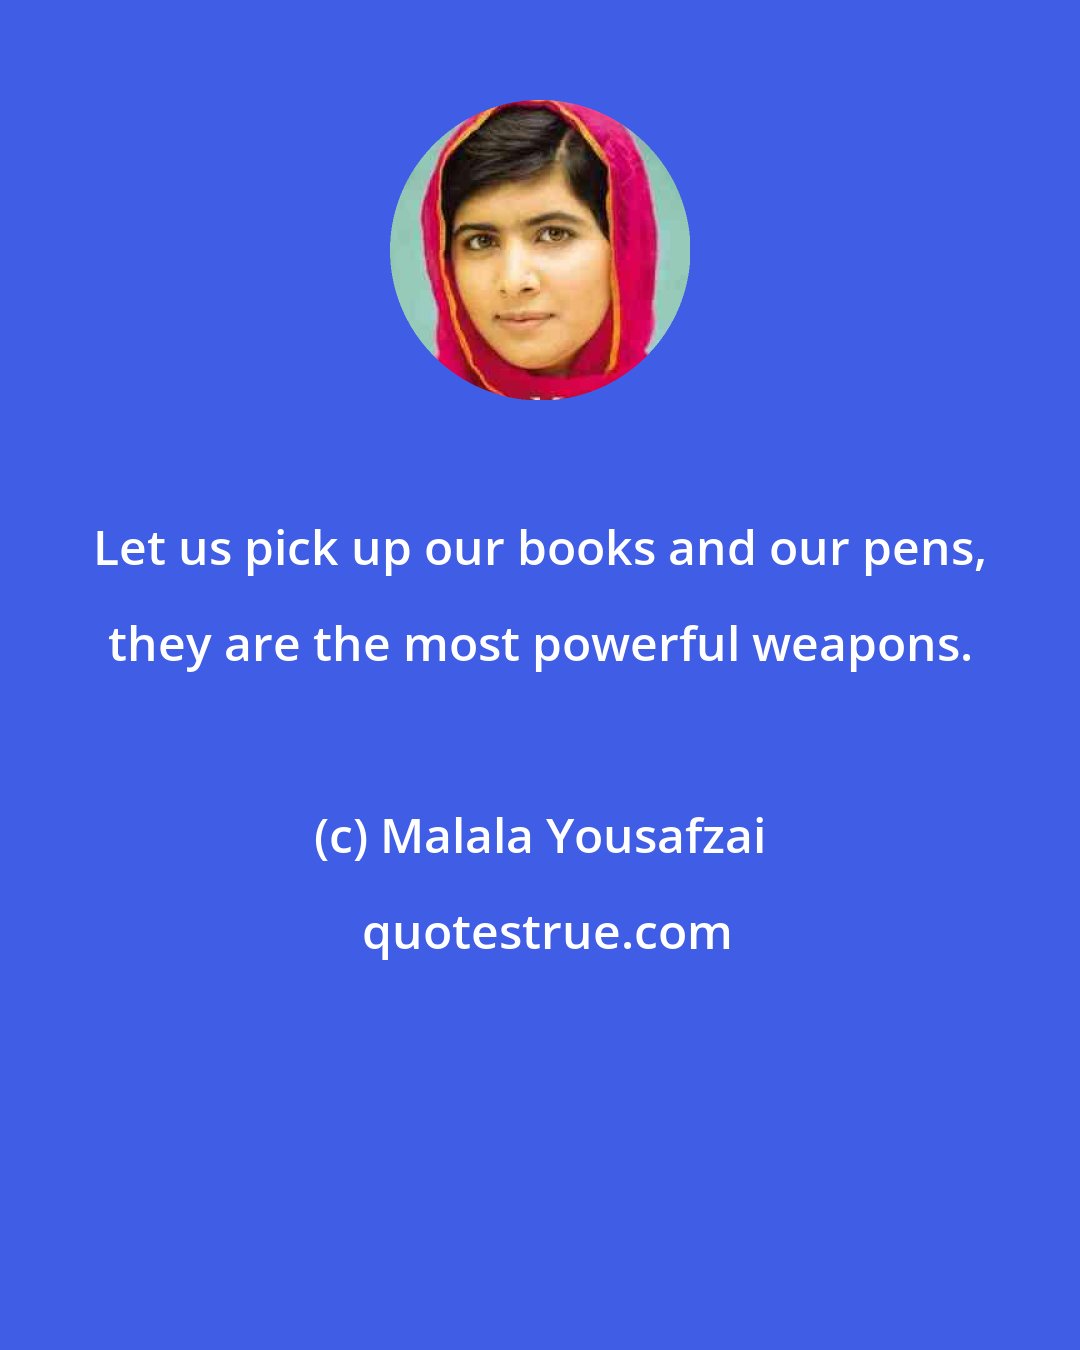 Malala Yousafzai: Let us pick up our books and our pens, they are the most powerful weapons.